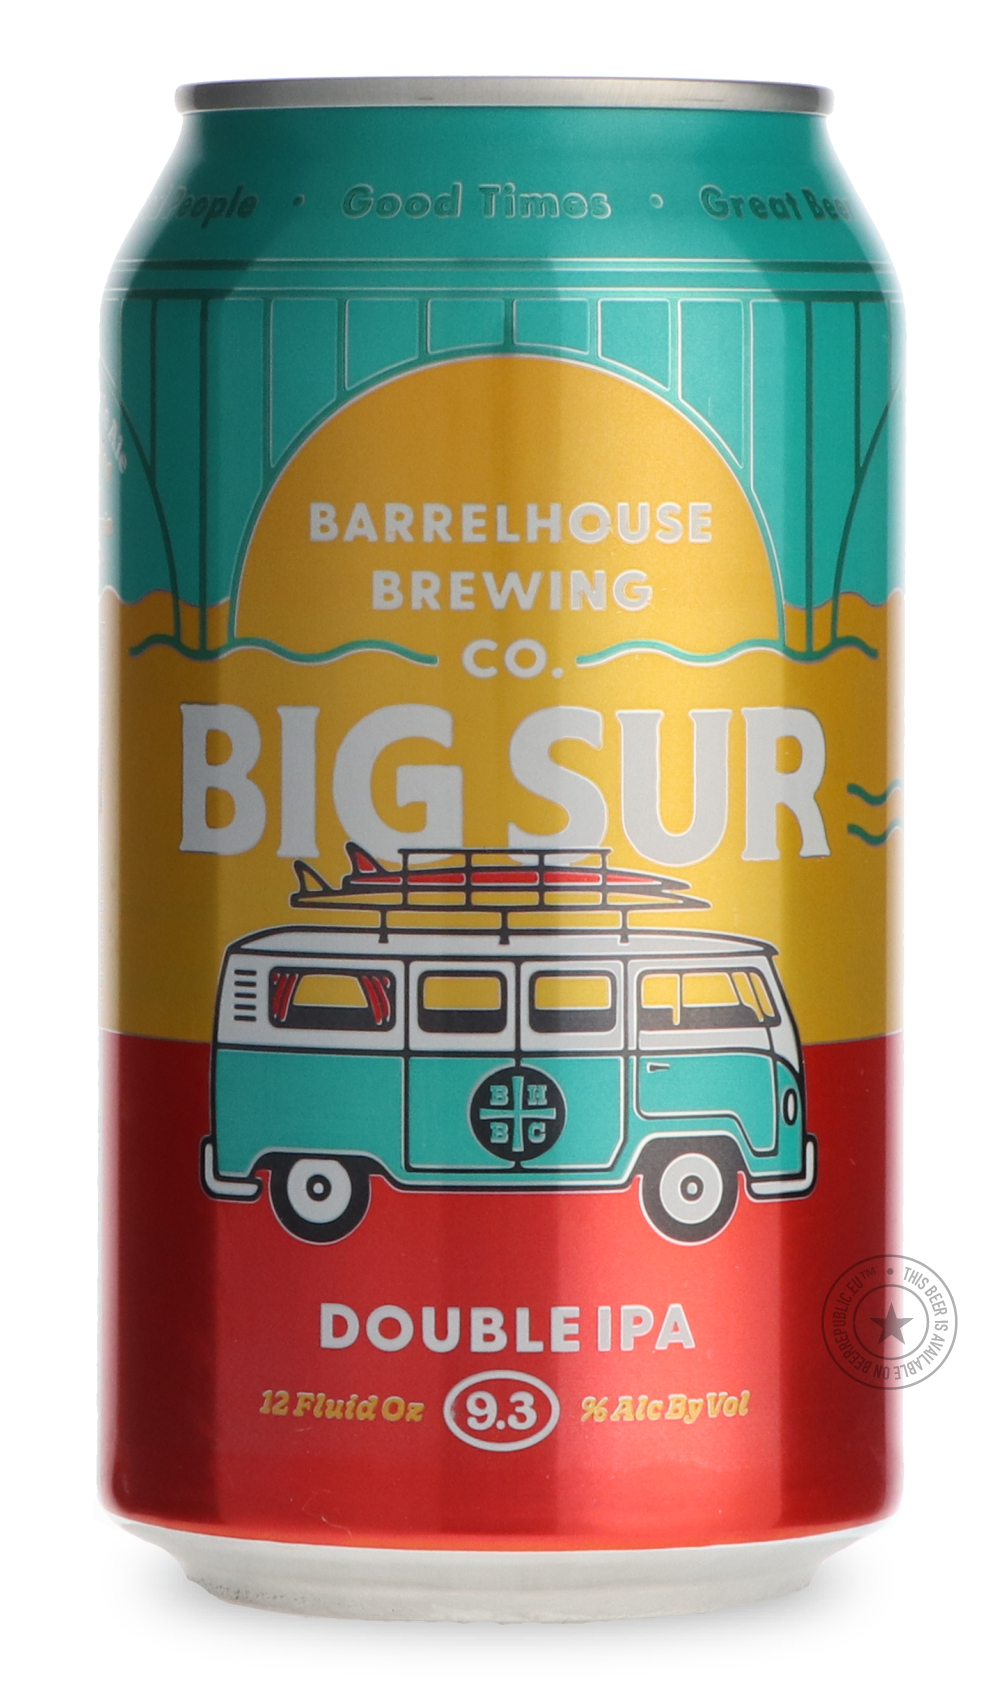 -BarrelHouse- Big Sur-IPA- Only @ Beer Republic - The best online beer store for American & Canadian craft beer - Buy beer online from the USA and Canada - Bier online kopen - Amerikaans bier kopen - Craft beer store - Craft beer kopen - Amerikanisch bier kaufen - Bier online kaufen - Acheter biere online - IPA - Stout - Porter - New England IPA - Hazy IPA - Imperial Stout - Barrel Aged - Barrel Aged Imperial Stout - Brown - Dark beer - Blond - Blonde - Pilsner - Lager - Wheat - Weizen - Amber - Barley Wine